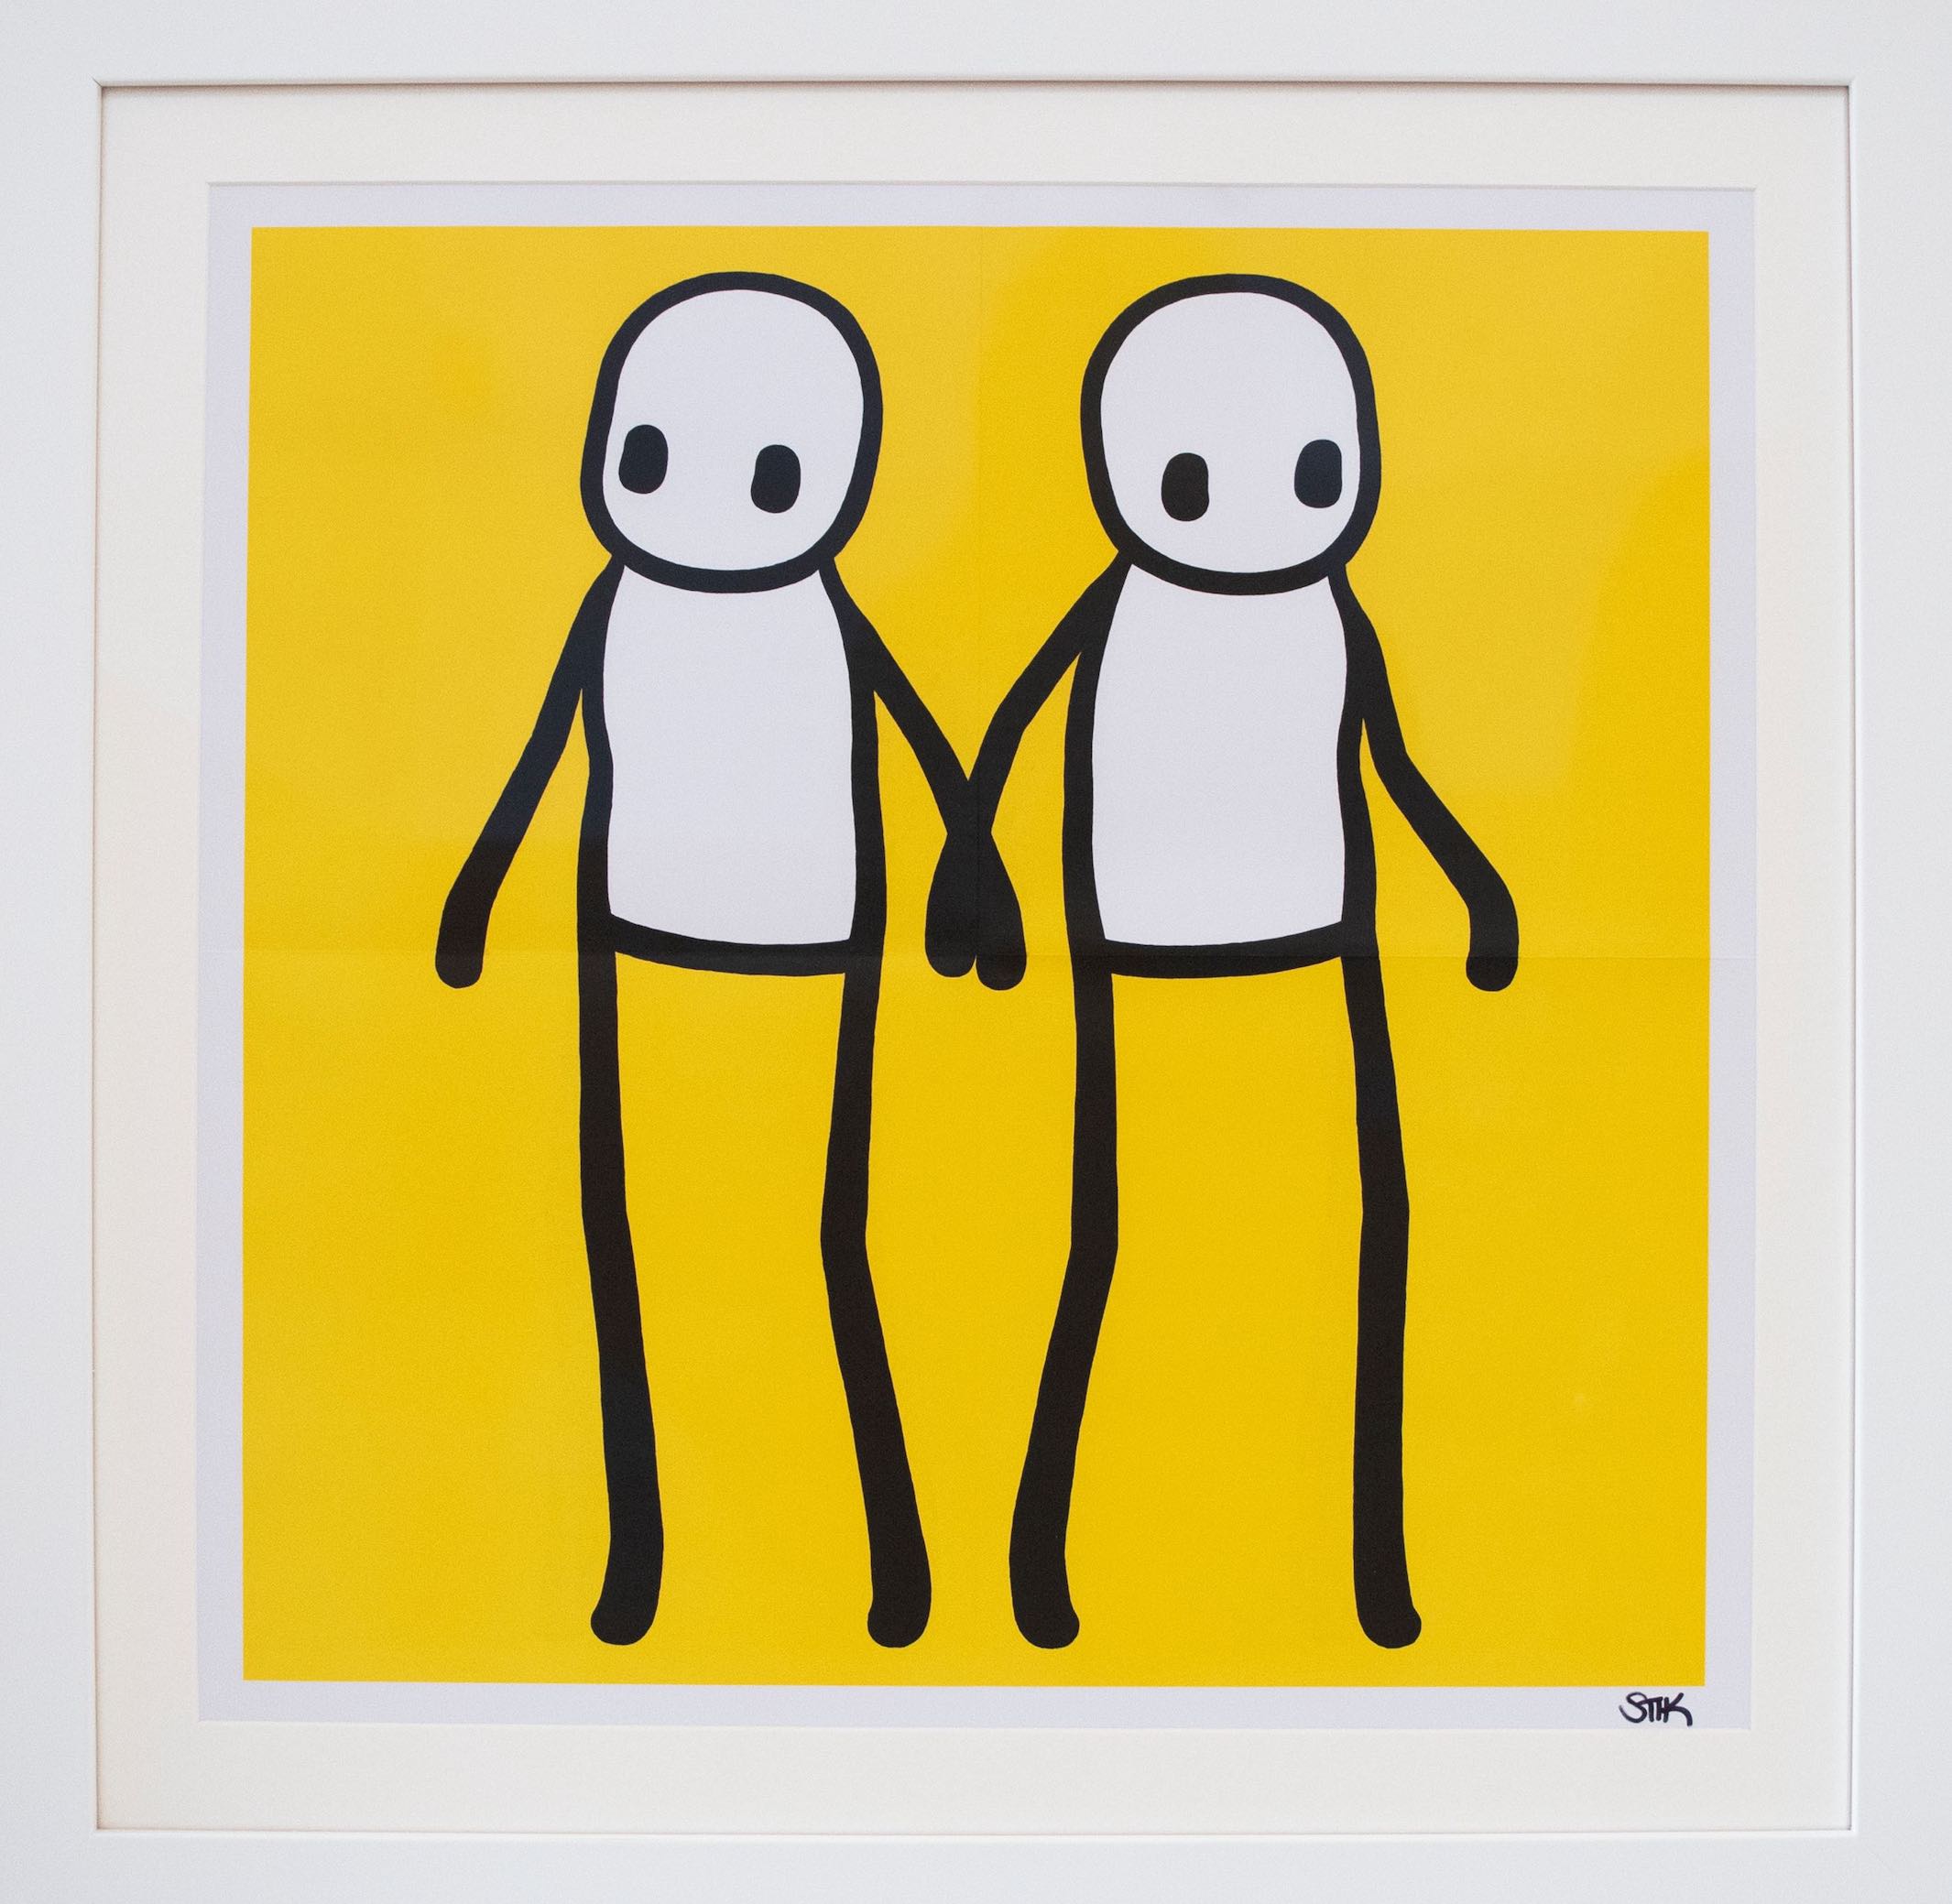 Stik Holding Hands Yellow 2020 Offset litograph in colours on wove paper Hand signed by the artist 50 x 50 cm 705 x 705 x 25 cm framed Credits Elena Domenichini